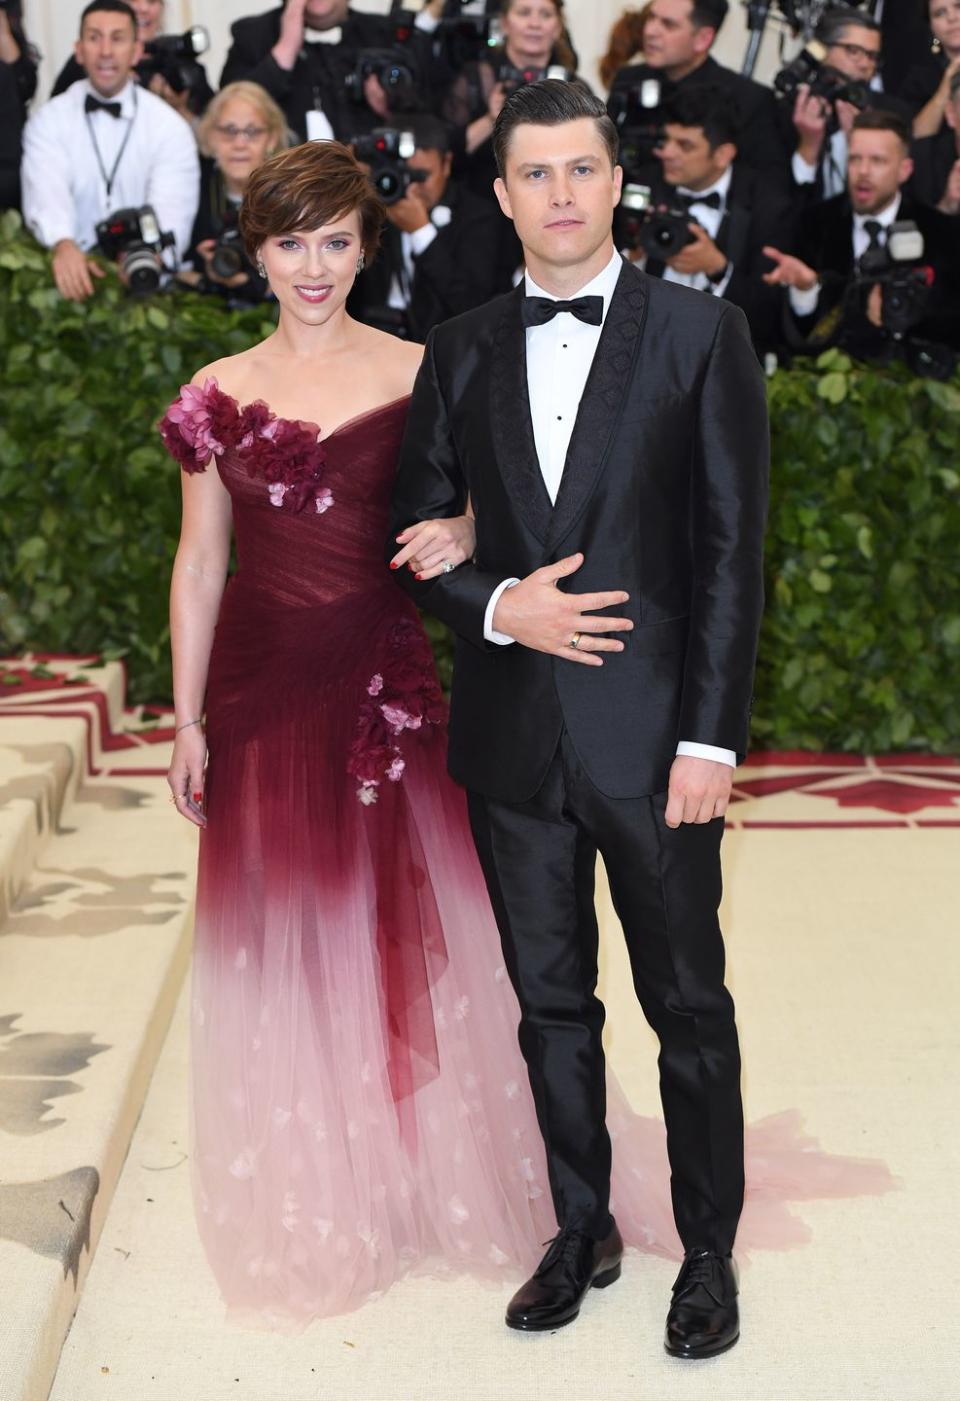 <p>Johansson and Jost attended the Met Gala together in May, a month after their first red-carpet debut. </p><p>The year's event was titled, 'Heavenly Bodies: Fashion and the Catholic Imagination', and the Marriage Story actor offset Jost's crisp tailoring in a floral-appliquéd ombré Marchesa gown, complete with an undulating train that balanced its shoulder-baring top. <br></p>